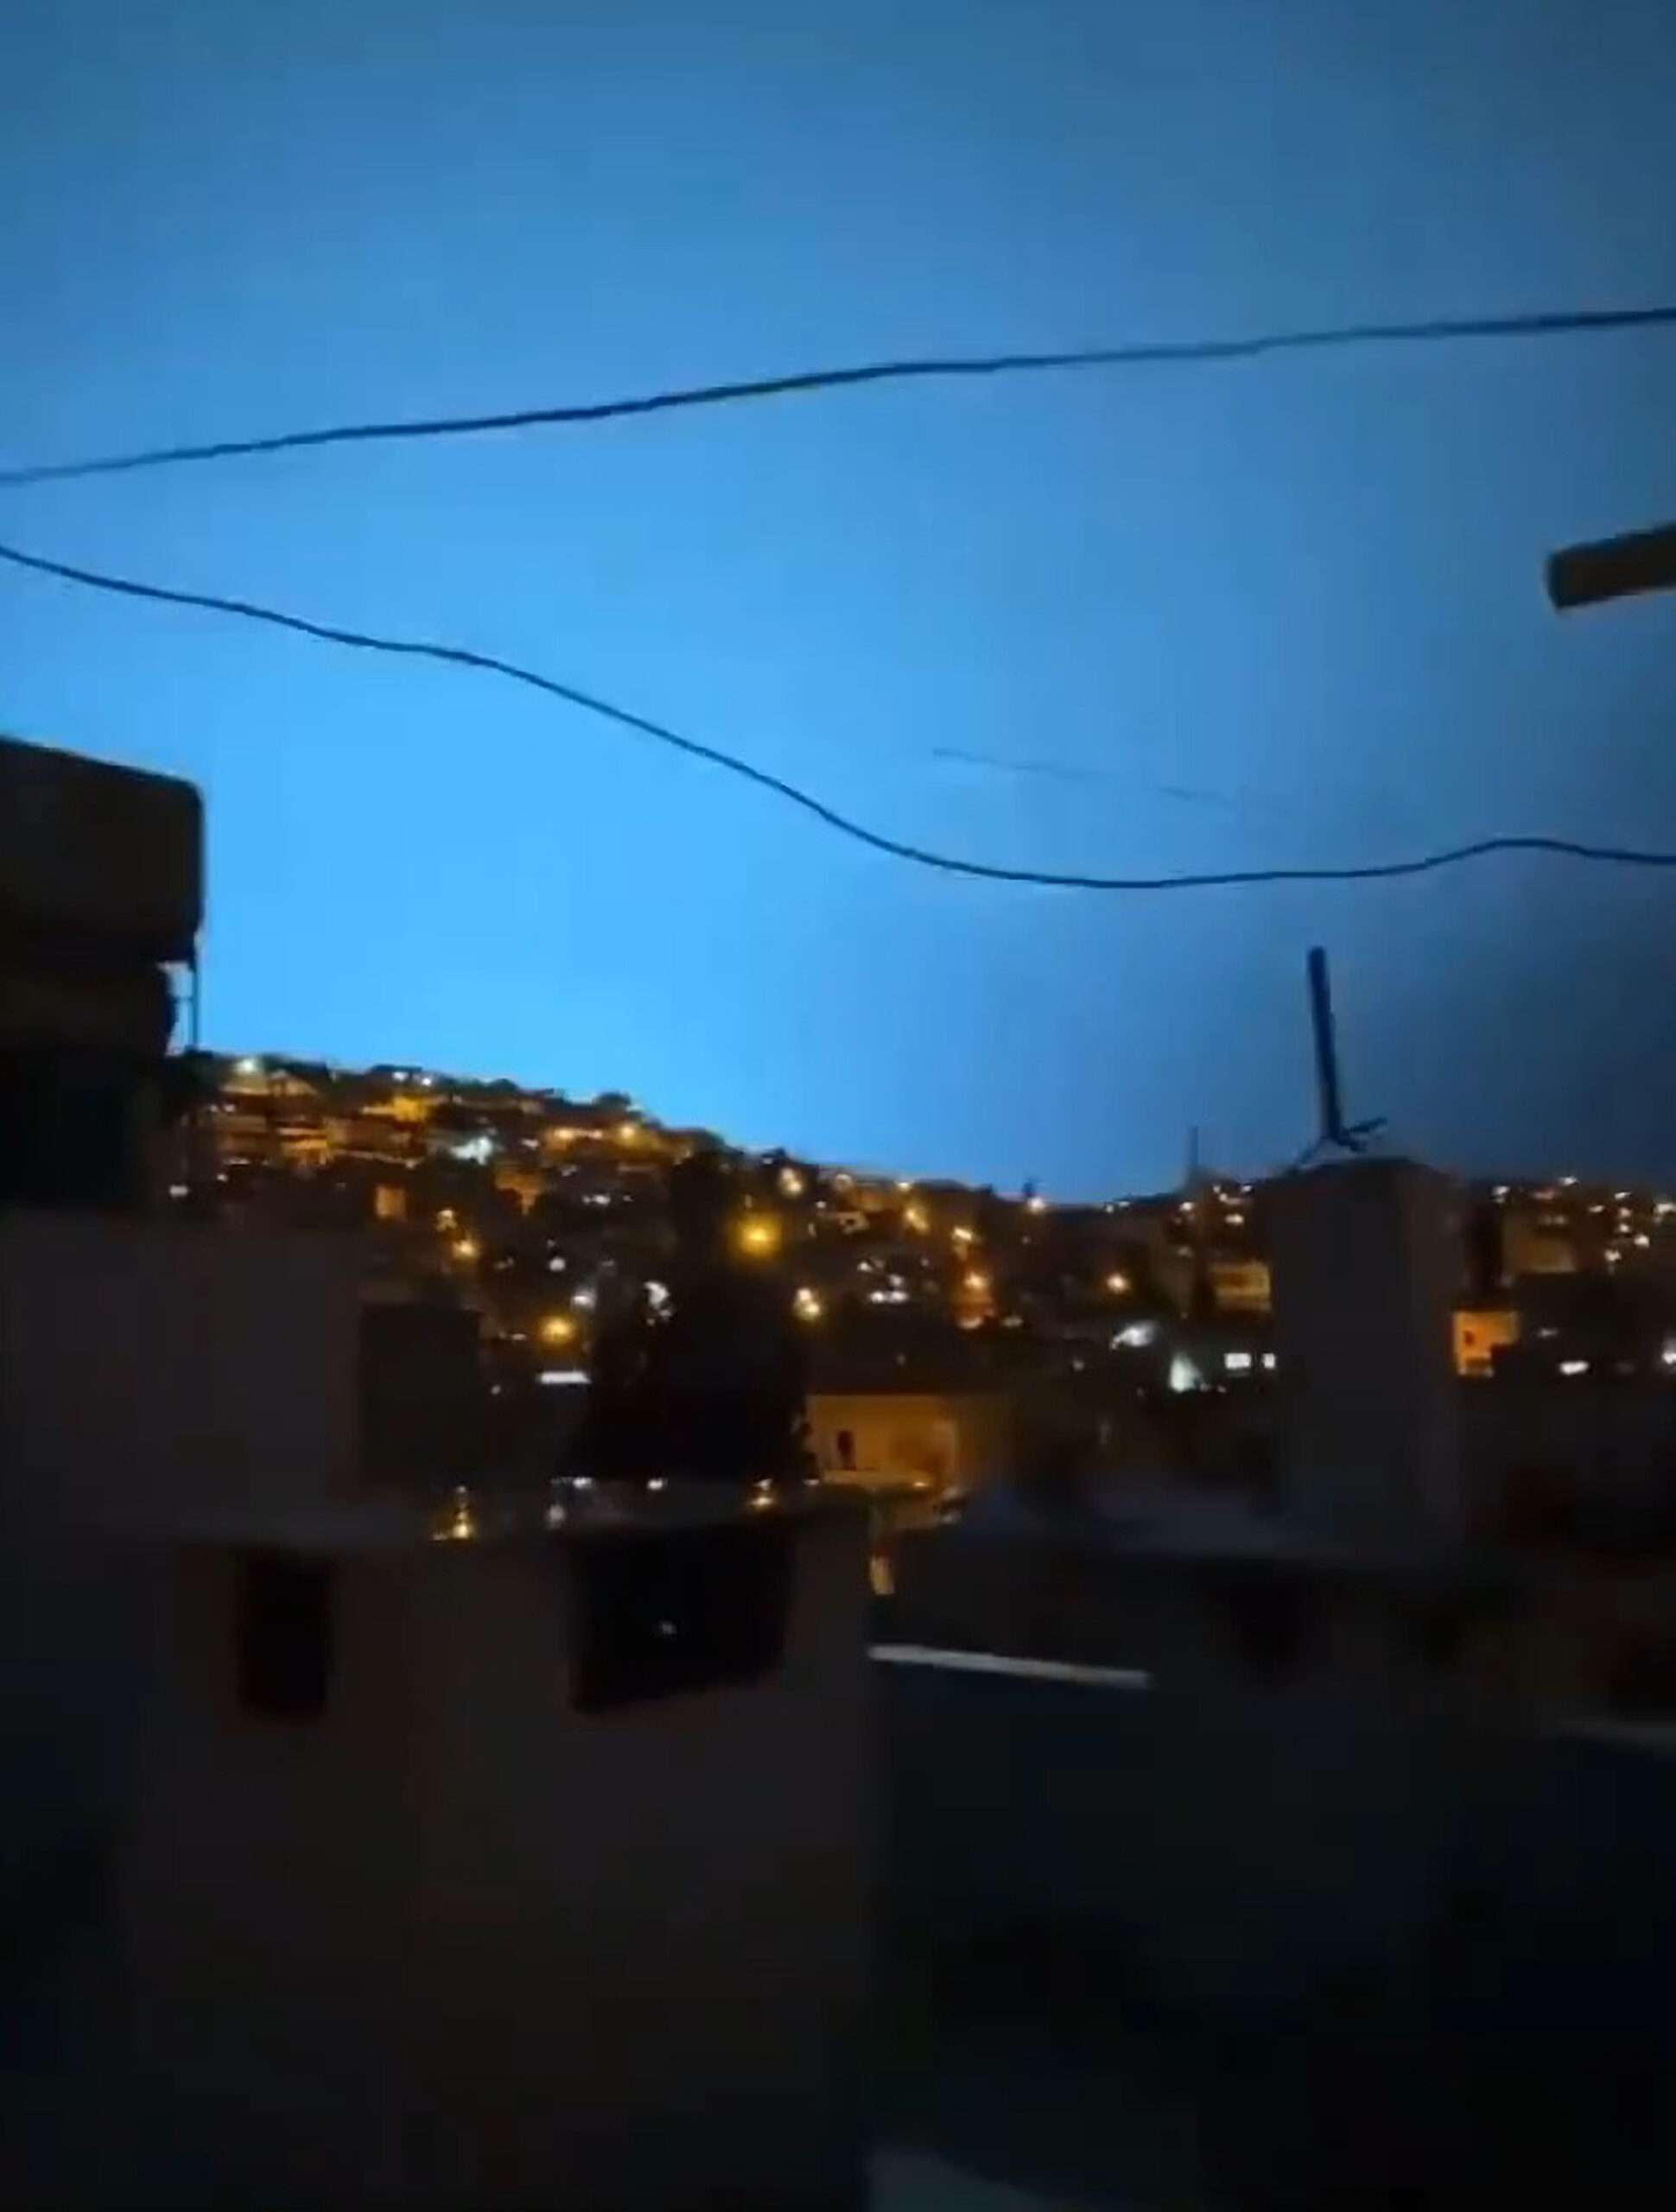 Read more about the article EERIE QUAKE LIGHT MYSTERY: Terrifying Azure Flashes In Night Sky As Quake Rumbles In Turkey